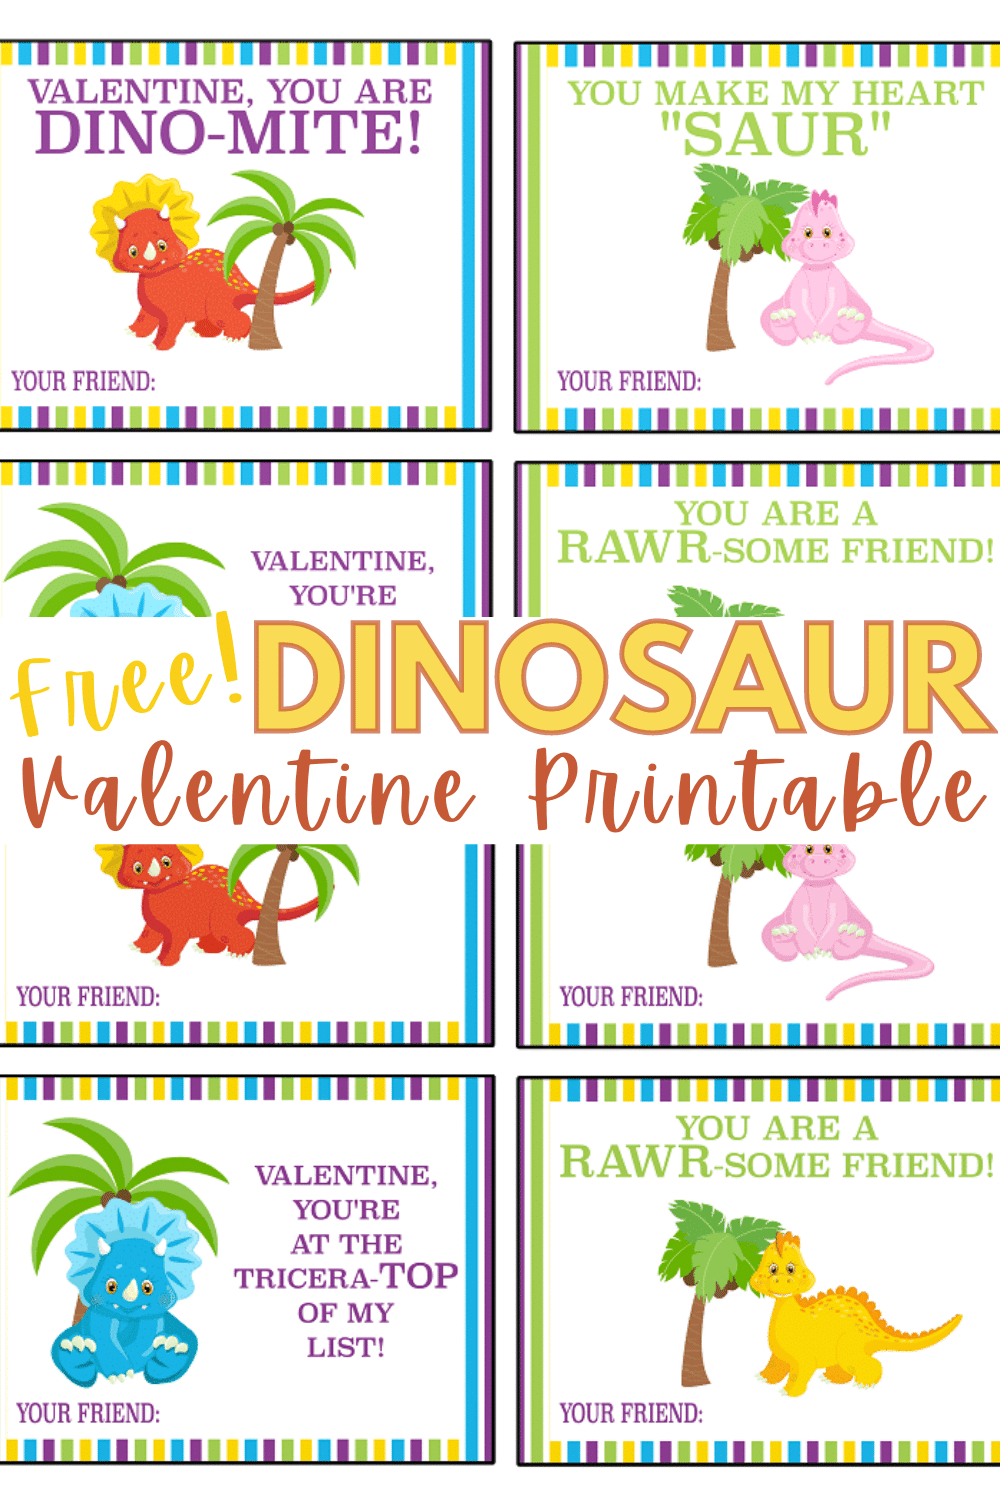 Who doesn't love dinosaur puns?! Give the kids a laugh with these Free Printable Dinosaur Valentine Cards, perfect for Valentine's Day! #valentinesday #valentinecards #dinosaur #puns #freeprintable via @wondermomwannab